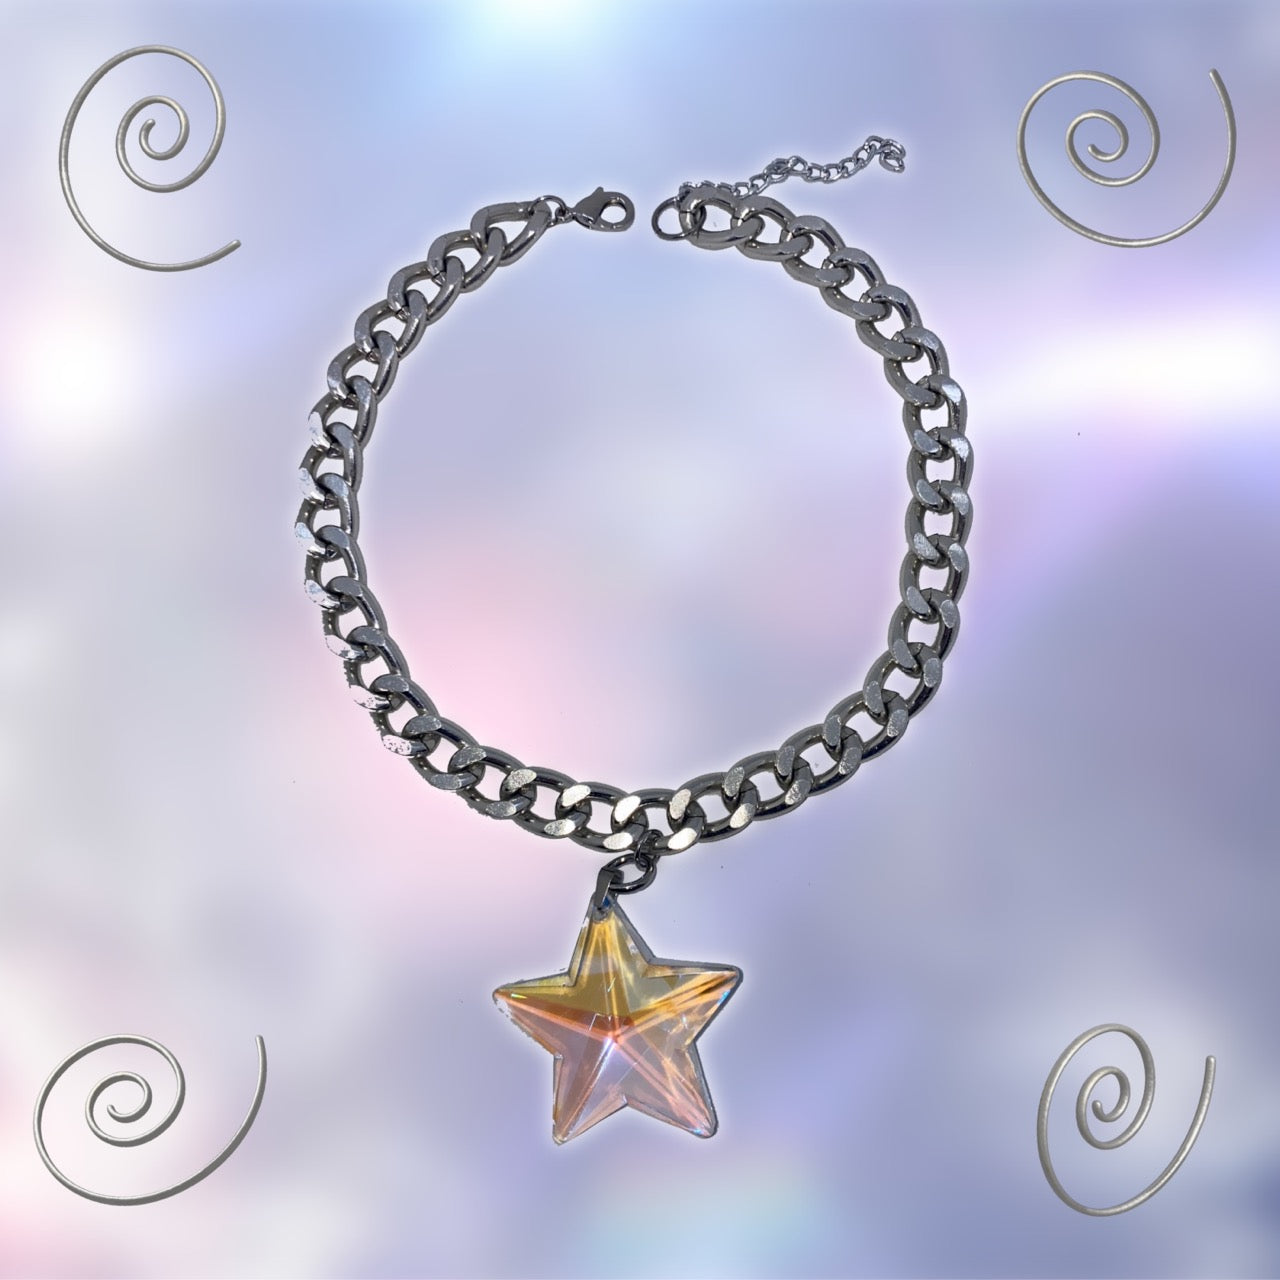 THE STAR SEMI CHOKER CHAIN NECKLACE - EXCLUSIVE Jewelry from SOFT RUINS - Just $50.00! SHOP NOW AT IAMINHATELOVE BOTH IN STORE FOR CYPRUS AND ONLINE WORLDWIDE